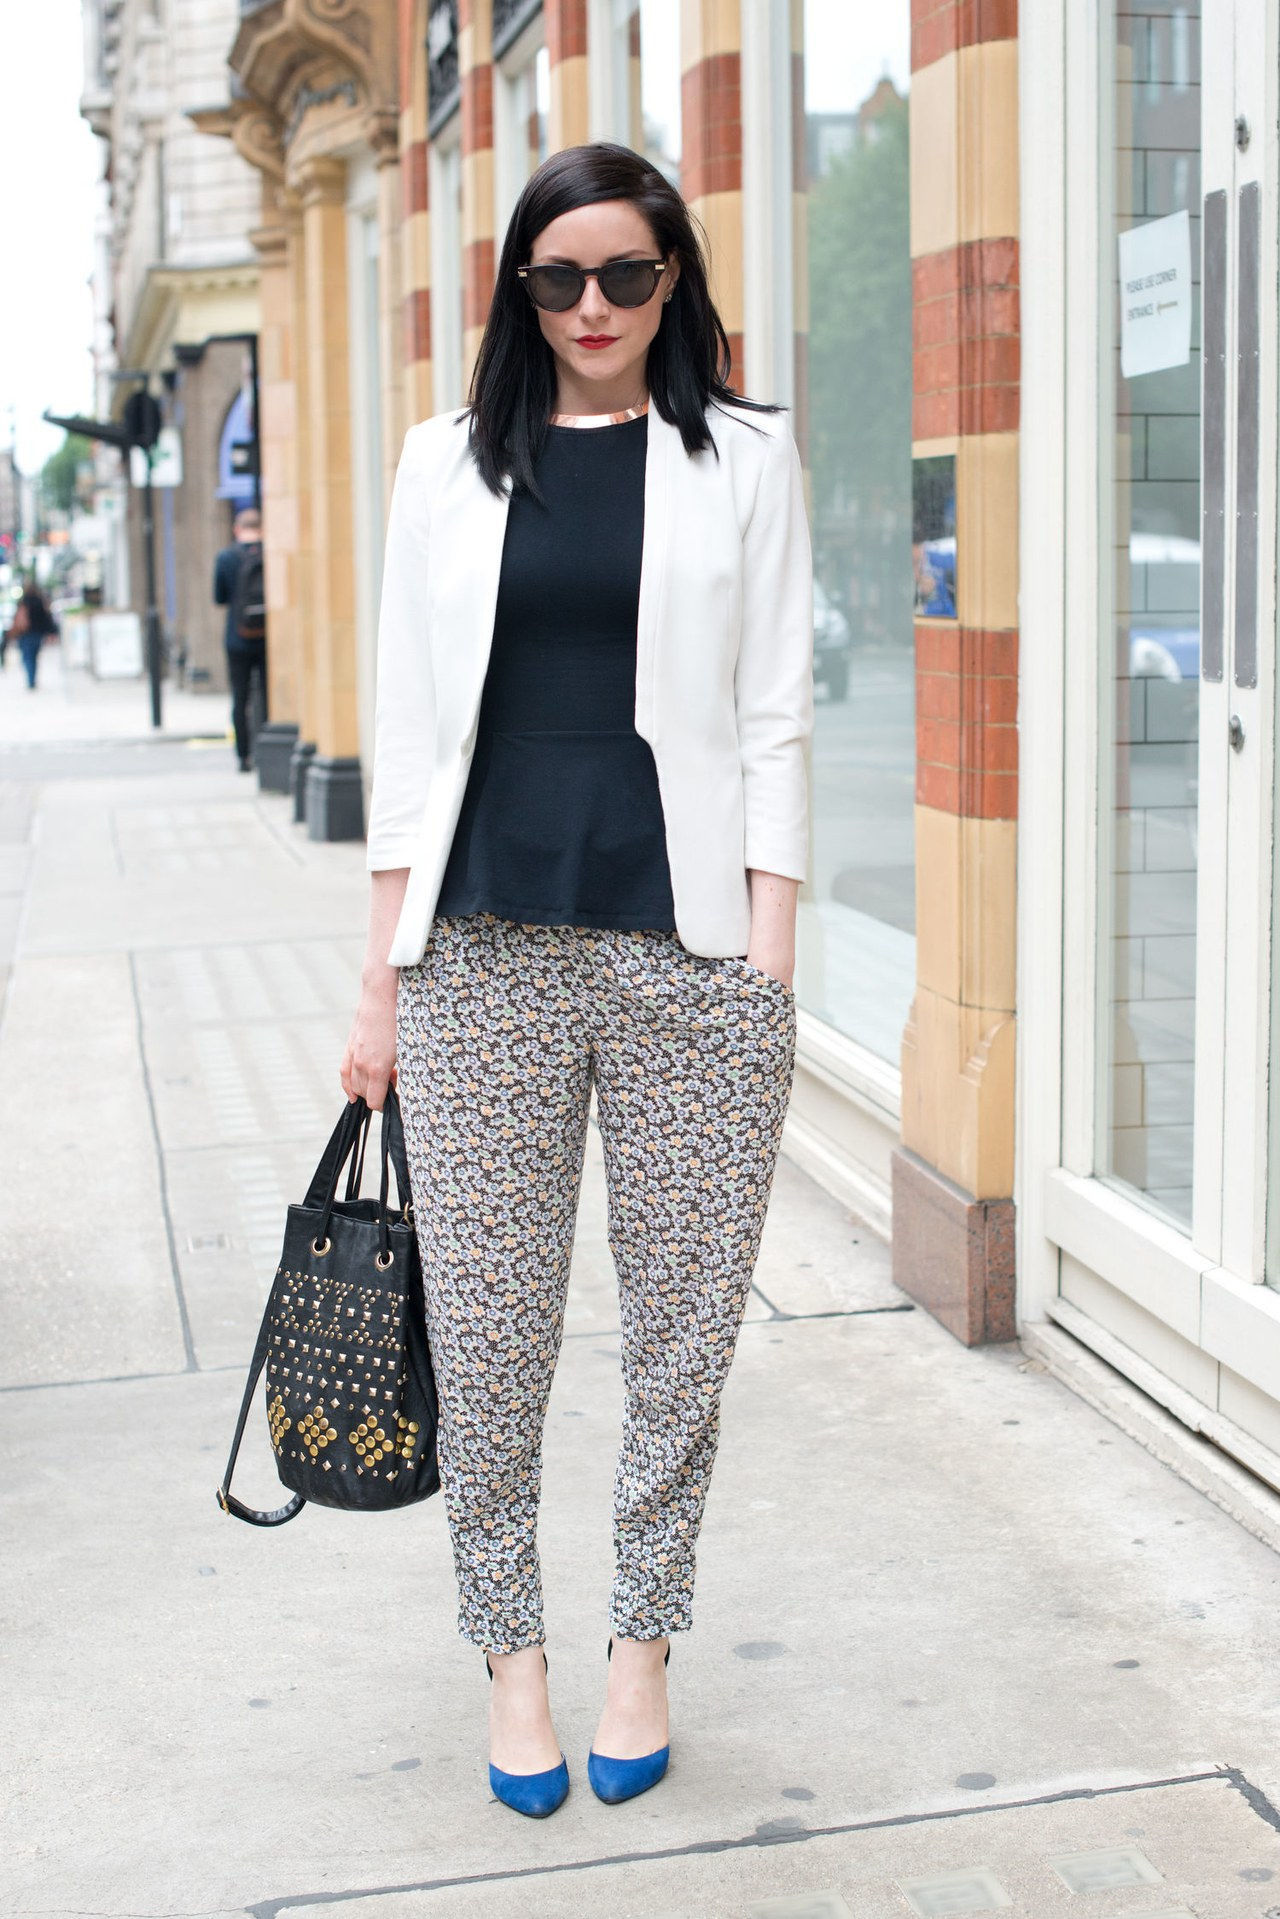 Blomster-Print Pants, a Black Top, and a White Blazer